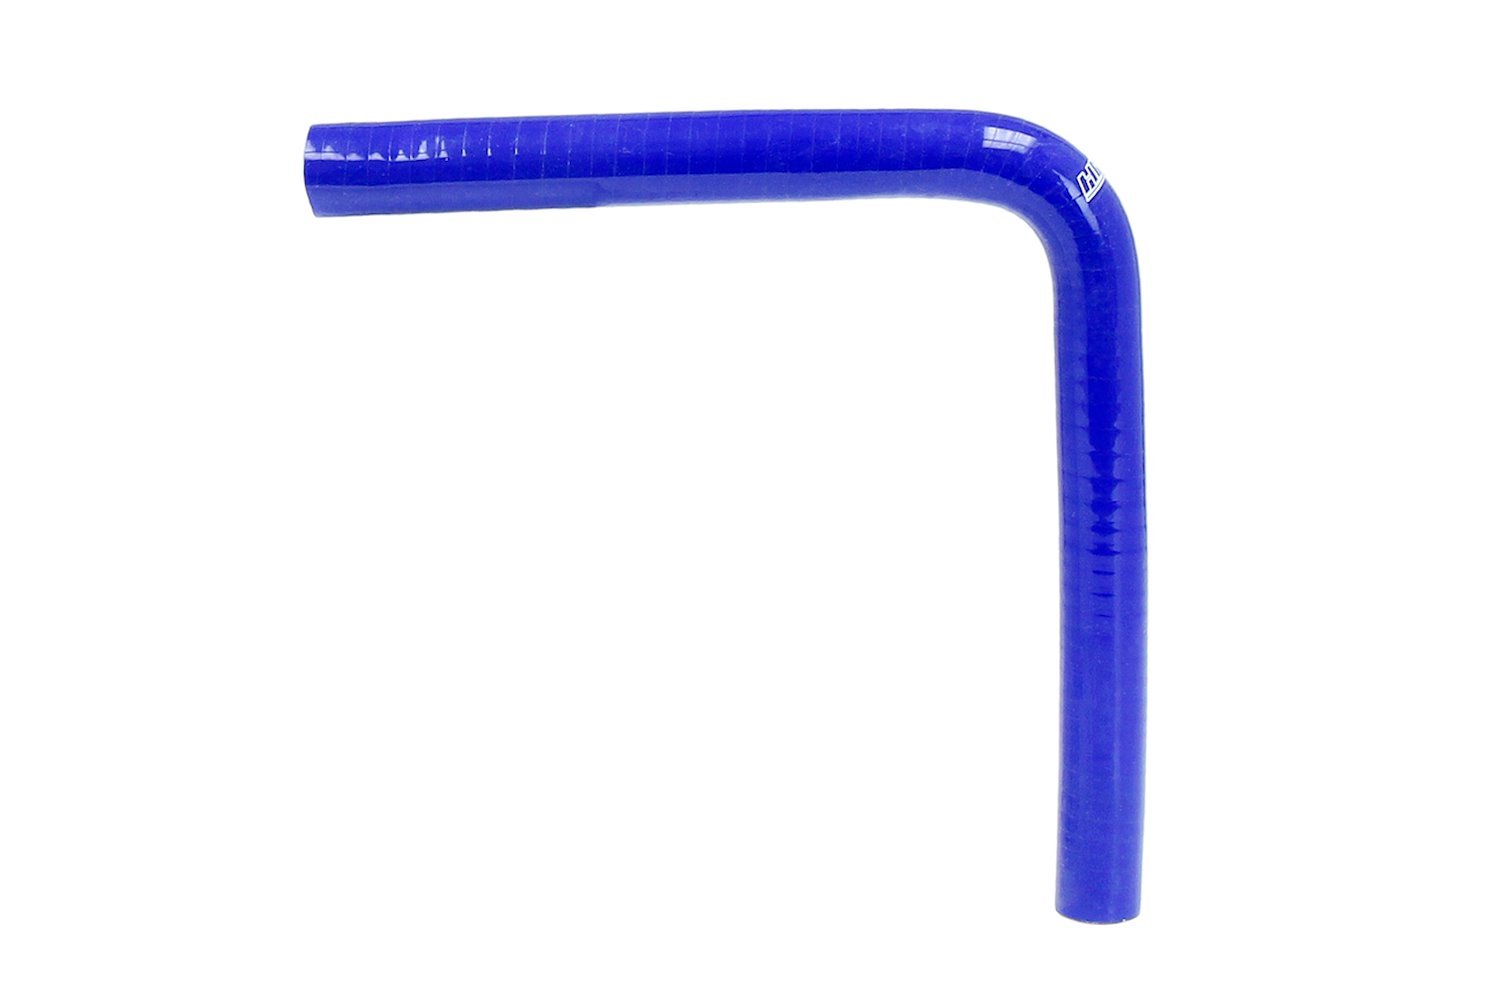 HTSEC90-162-L10-BLUE Silicone 90-Degree Elbow Hose, High-Temp 4-Ply Reinforced, 1-5/8 in. ID, 10 in. Leg, Blue